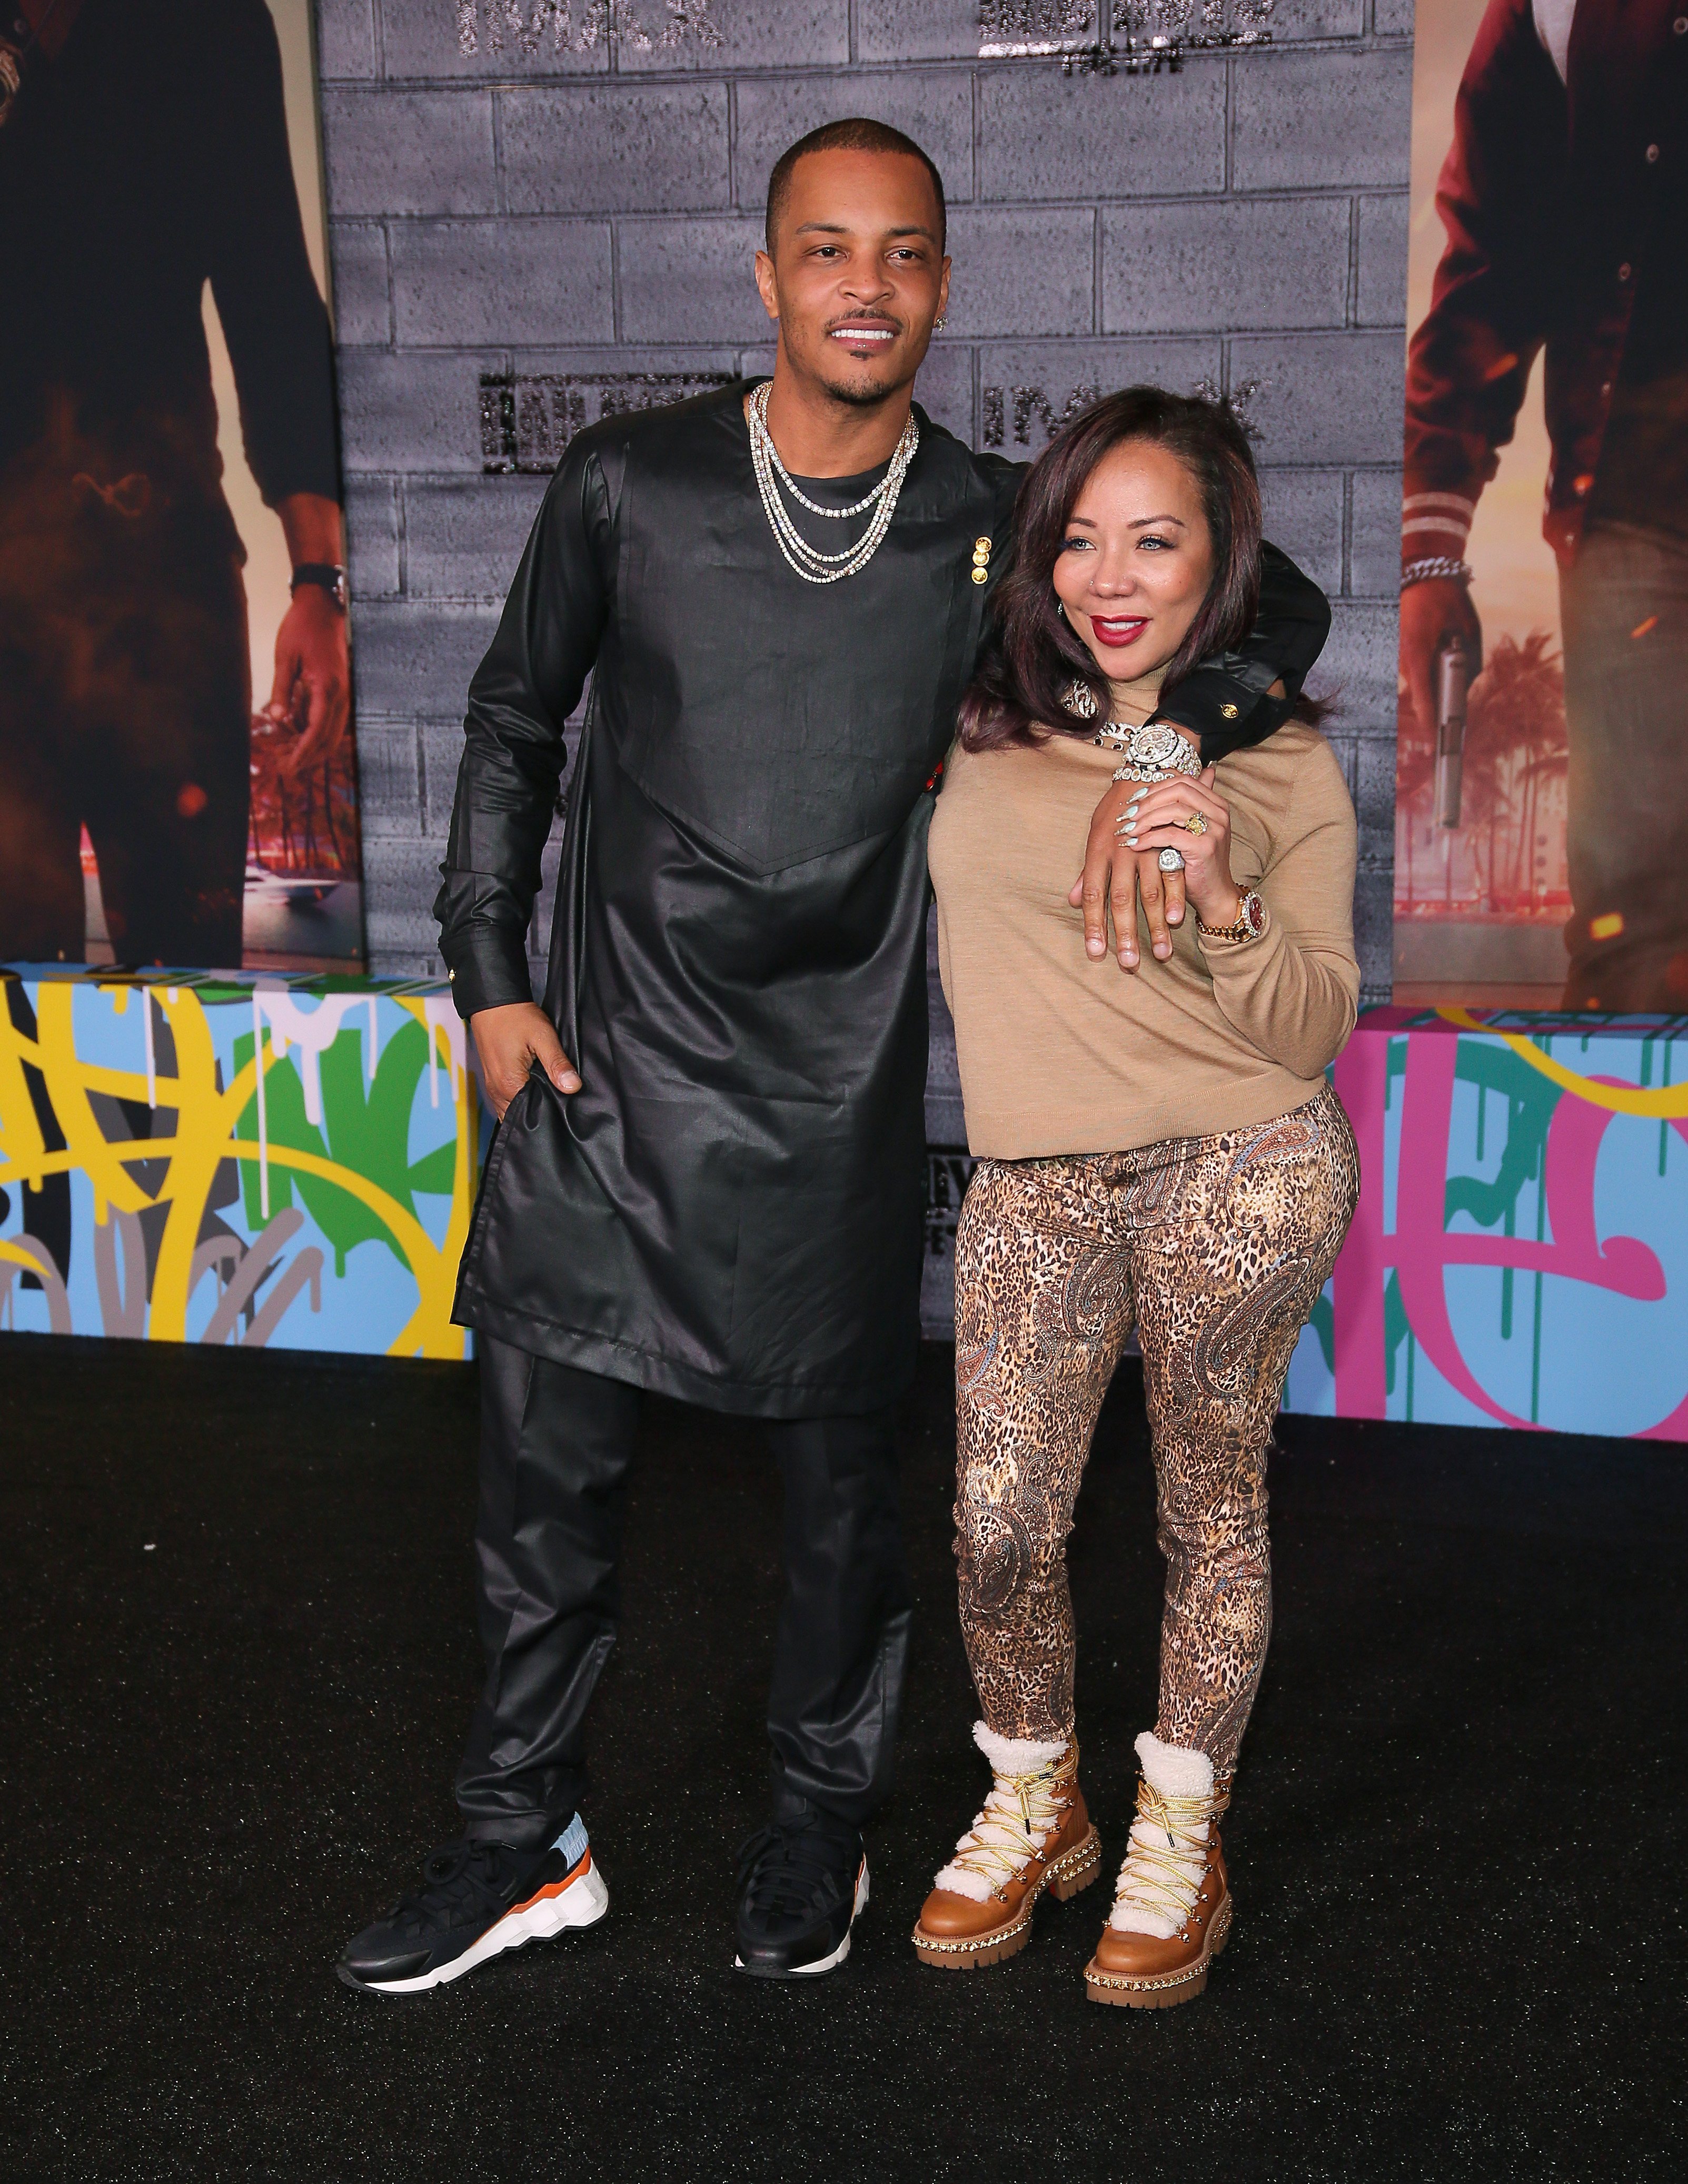 T.I. and Tameka Dianne "Tiny" Harris on January 14, 2020 in Hollywood, California | Source: Getty Images